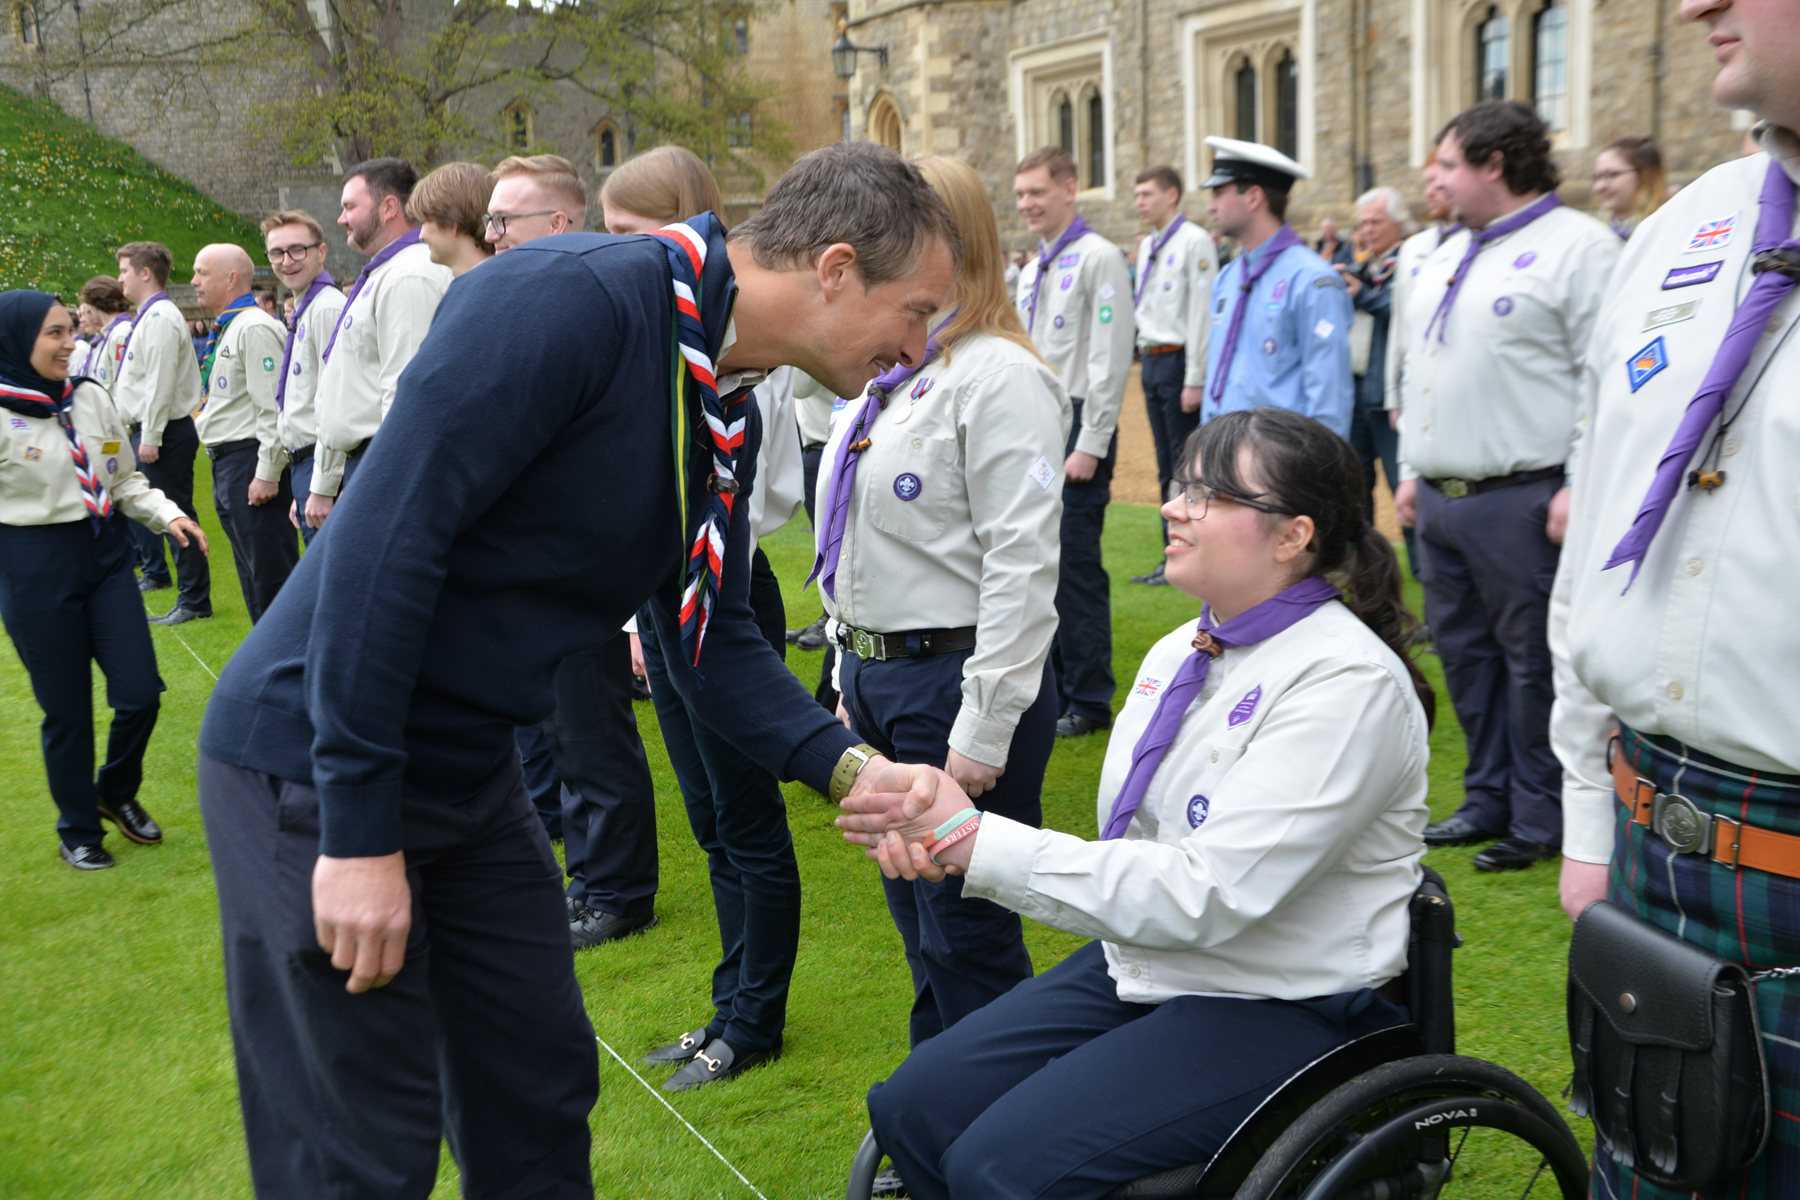 Bear Grylls is wearing a necker and standing on grass. He's bending over to shake the hand of a Scout in uniform who's in a wheelchair. Behind them are rows of other Scouts also in uniforms and neckers.